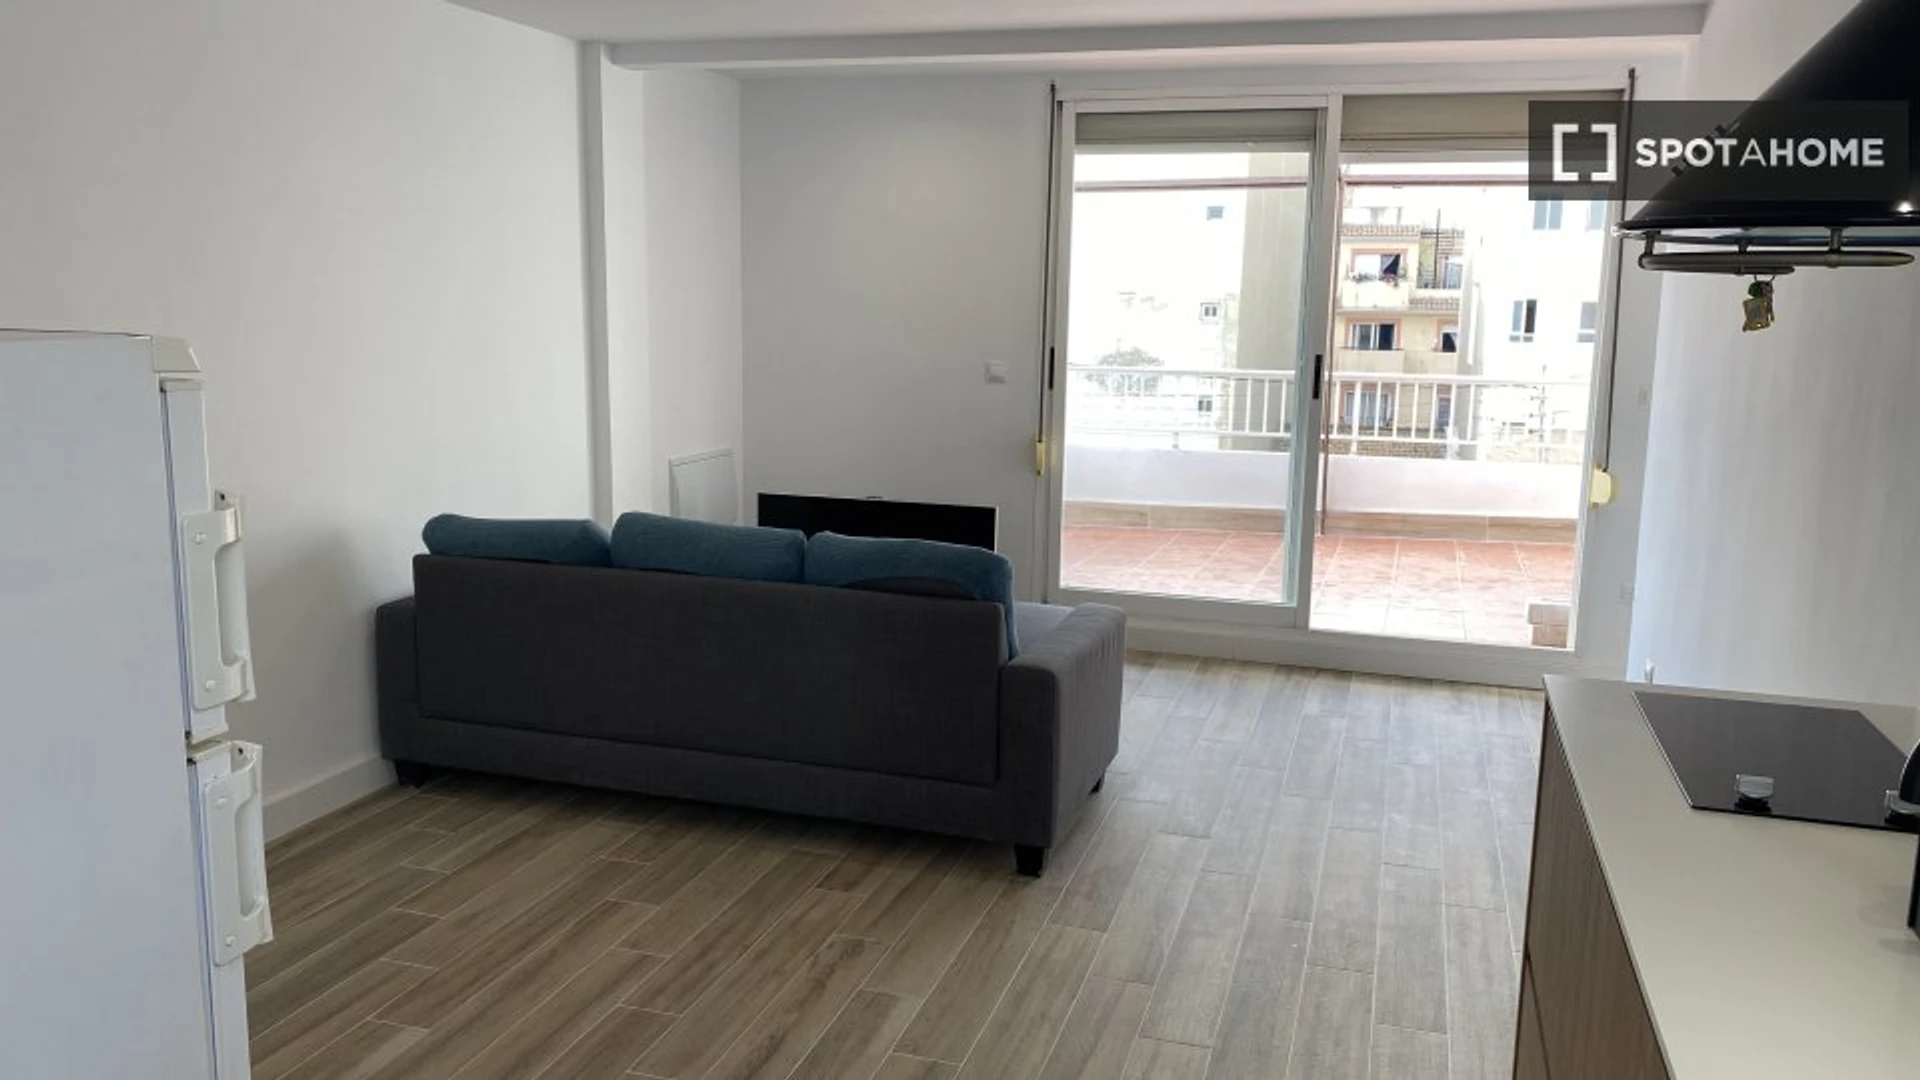 Renting rooms by the month in Alicante